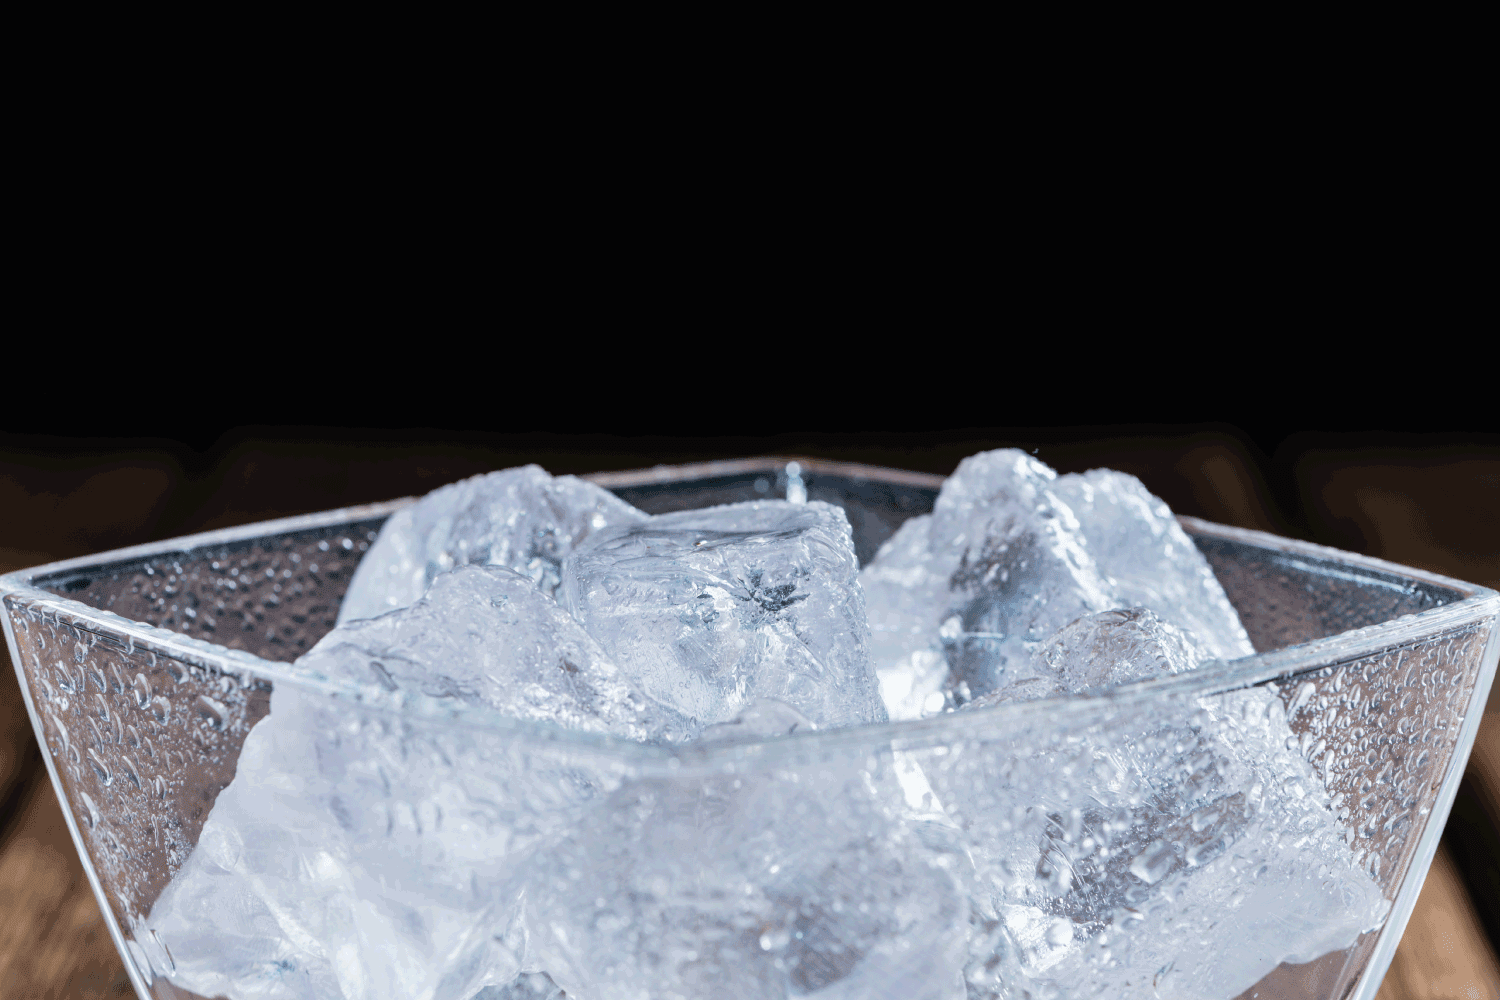 Bowl with Ice Cubes in dark background